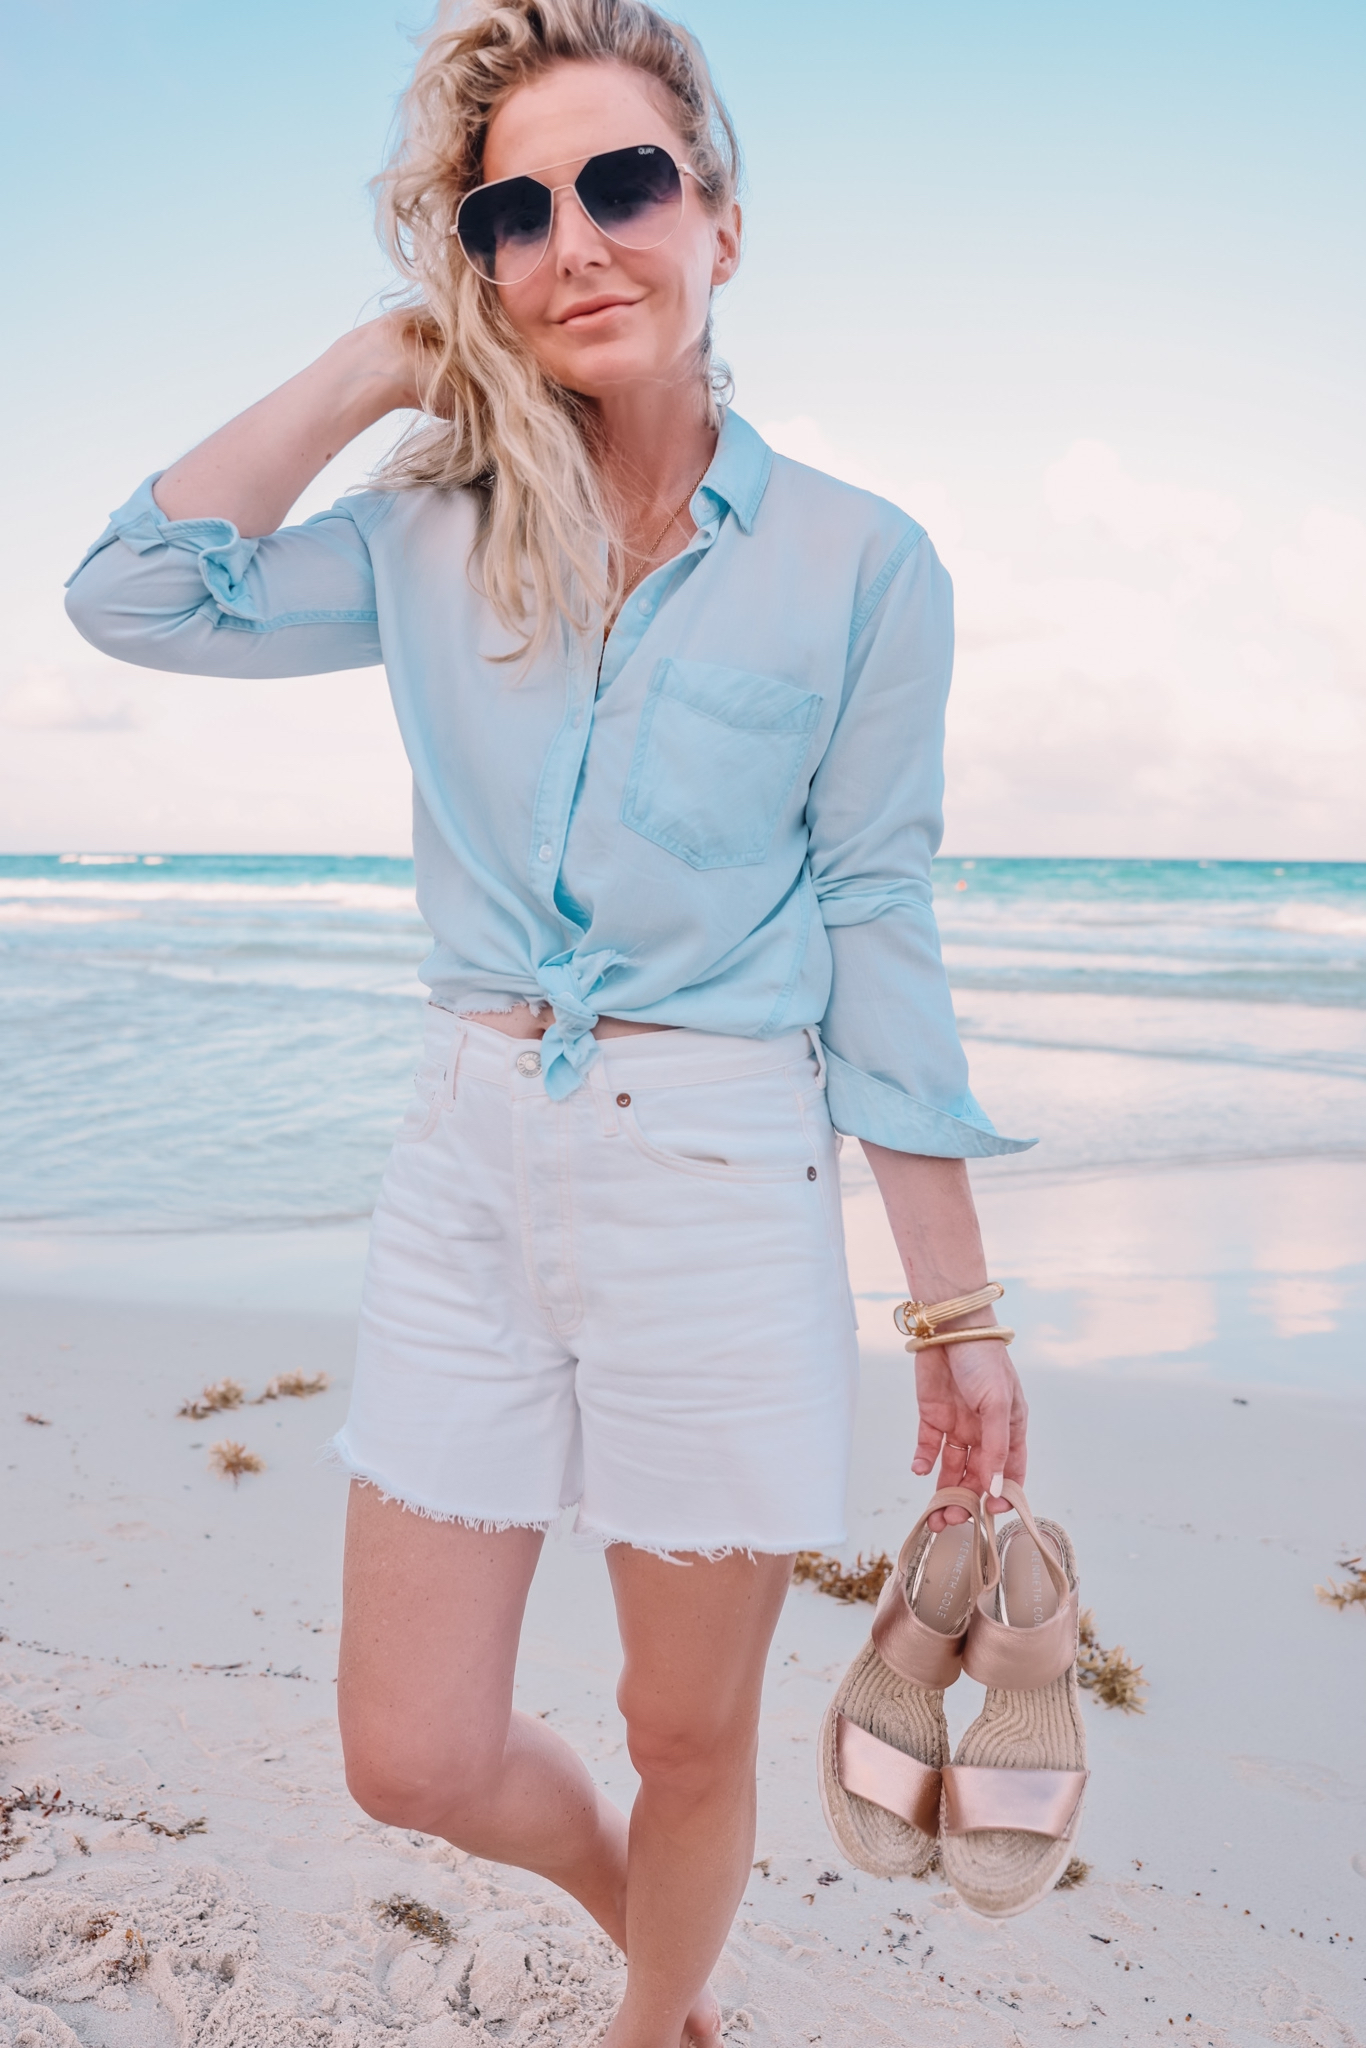 button down shirts, rails button down, chambray shirt, rails chambray shirt, white agolde jean shorts, white agolde denim shorts, denim shorts over 40, how to wear a button down, button down shirts for summer, best button down shirts, ways to wear shorts over 40